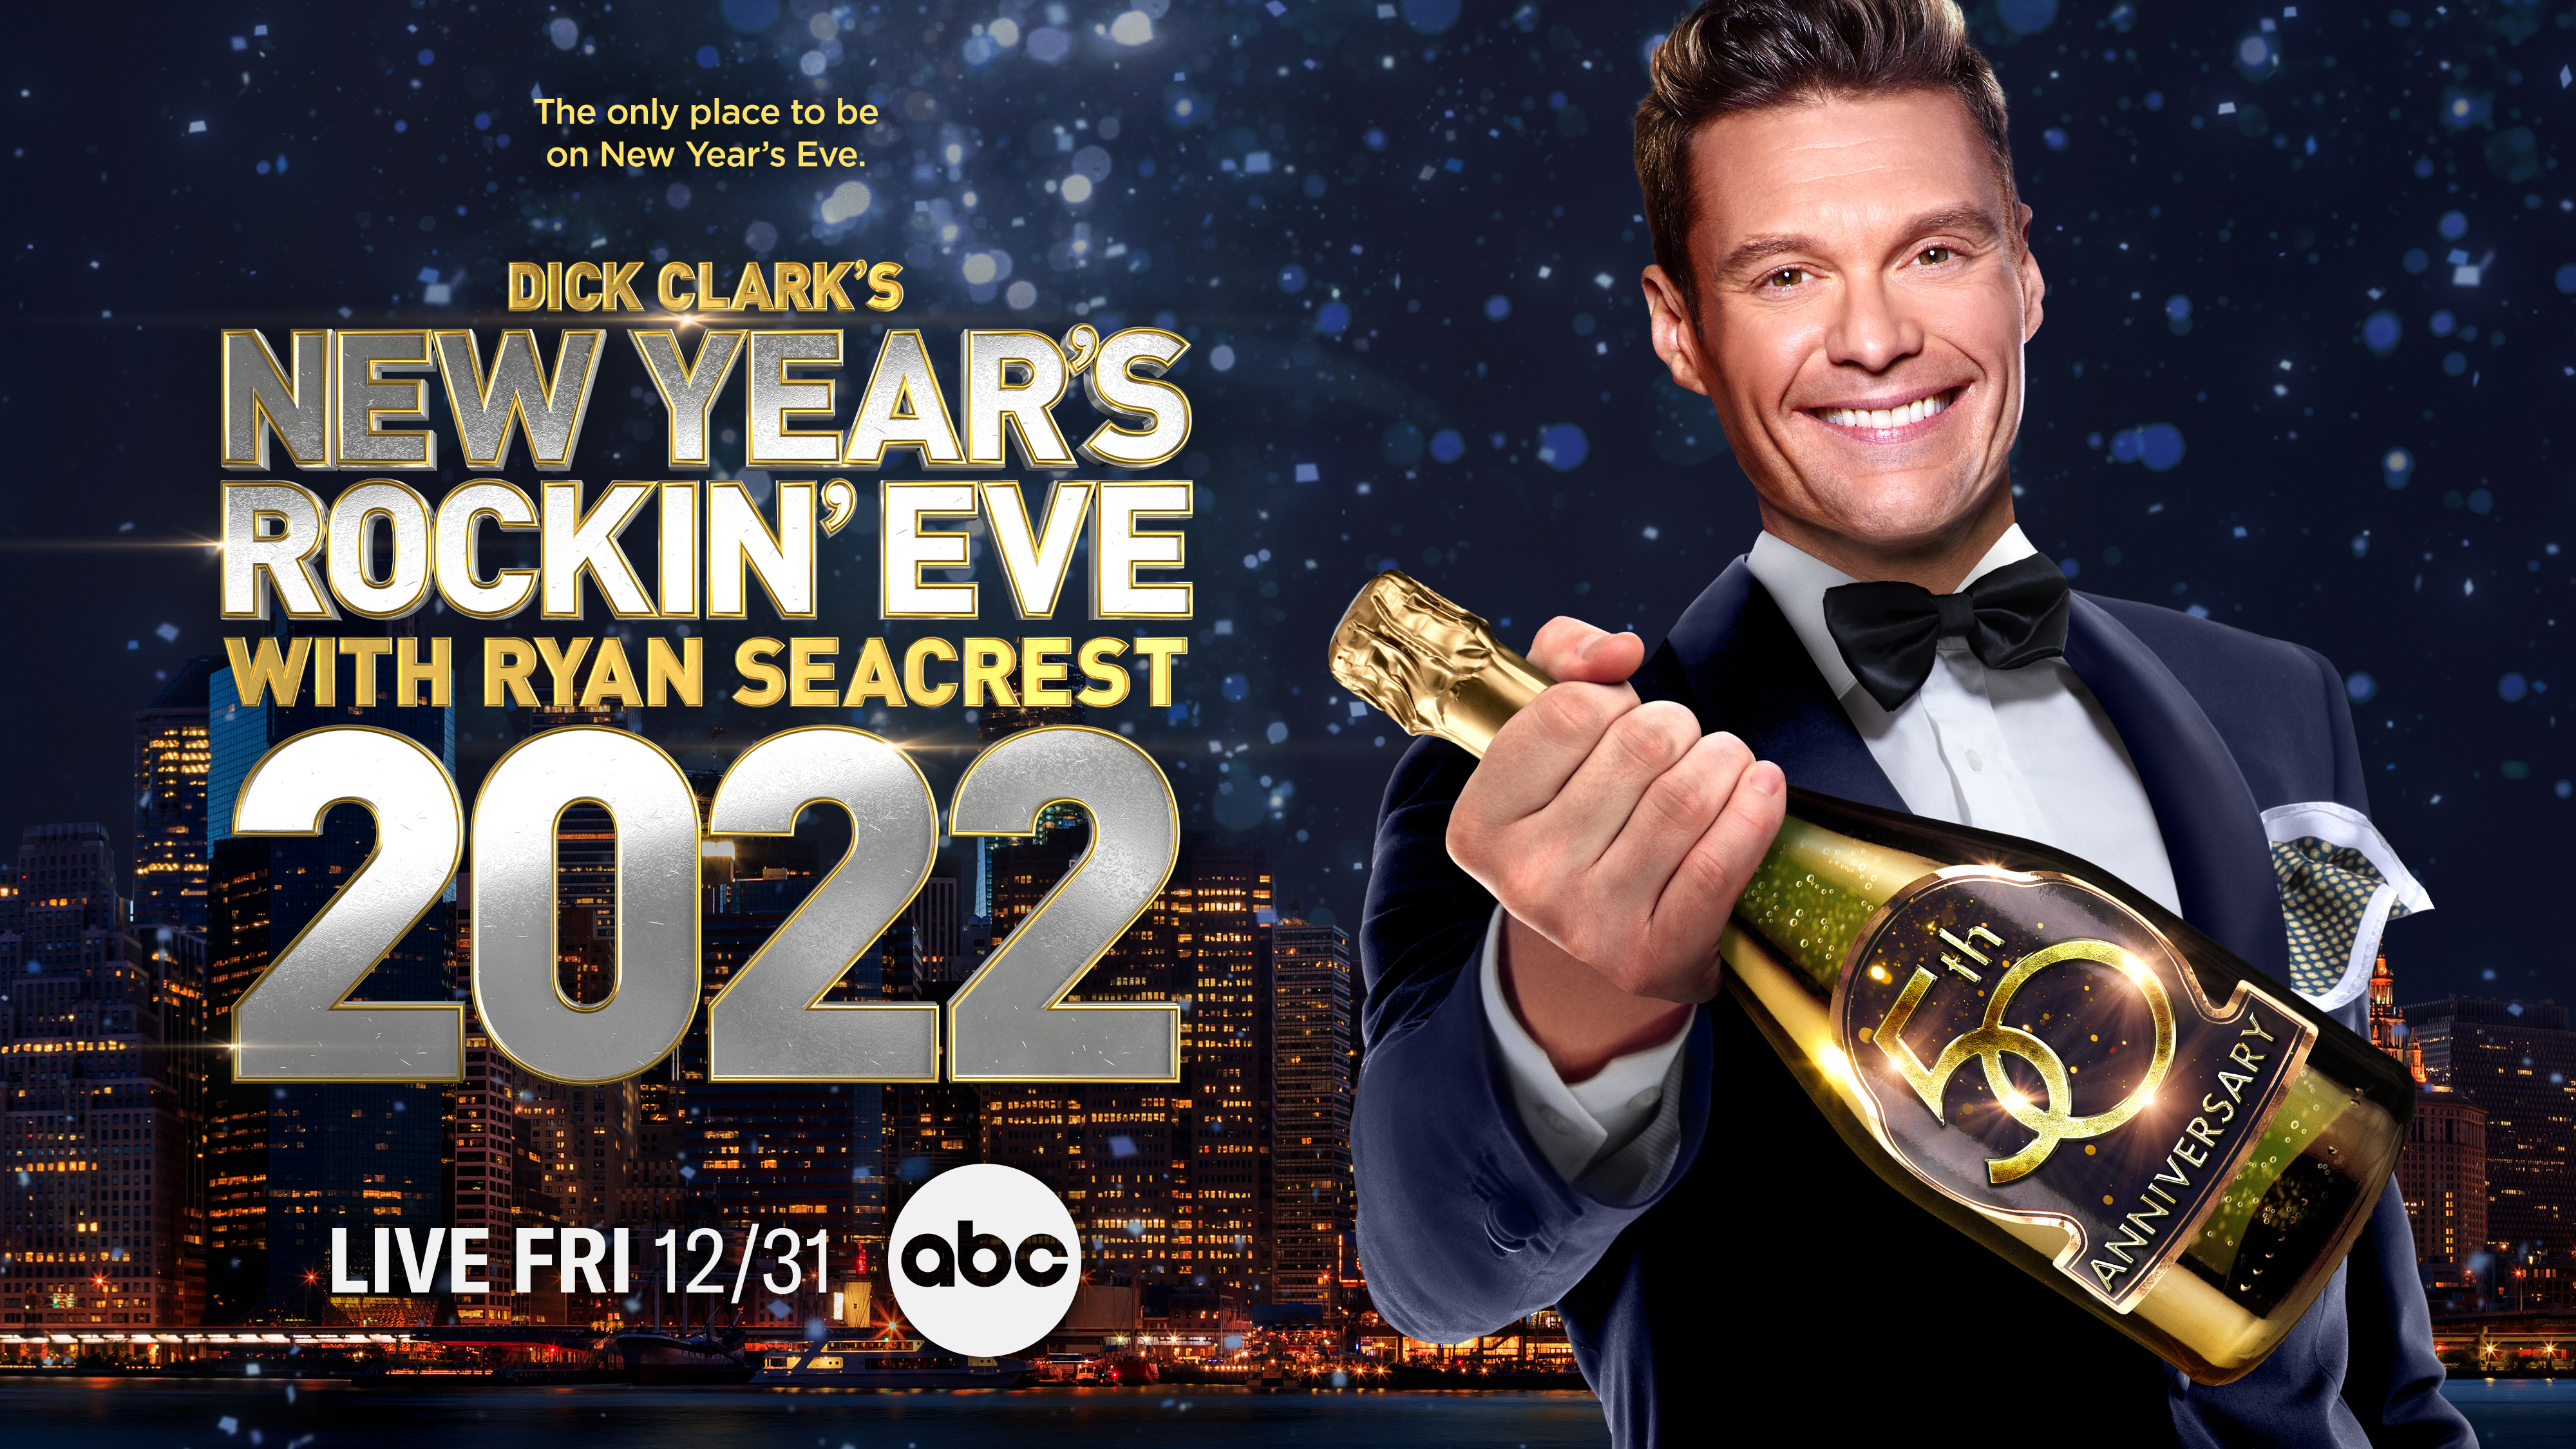 Dick clark's new year's rockin' eve channel